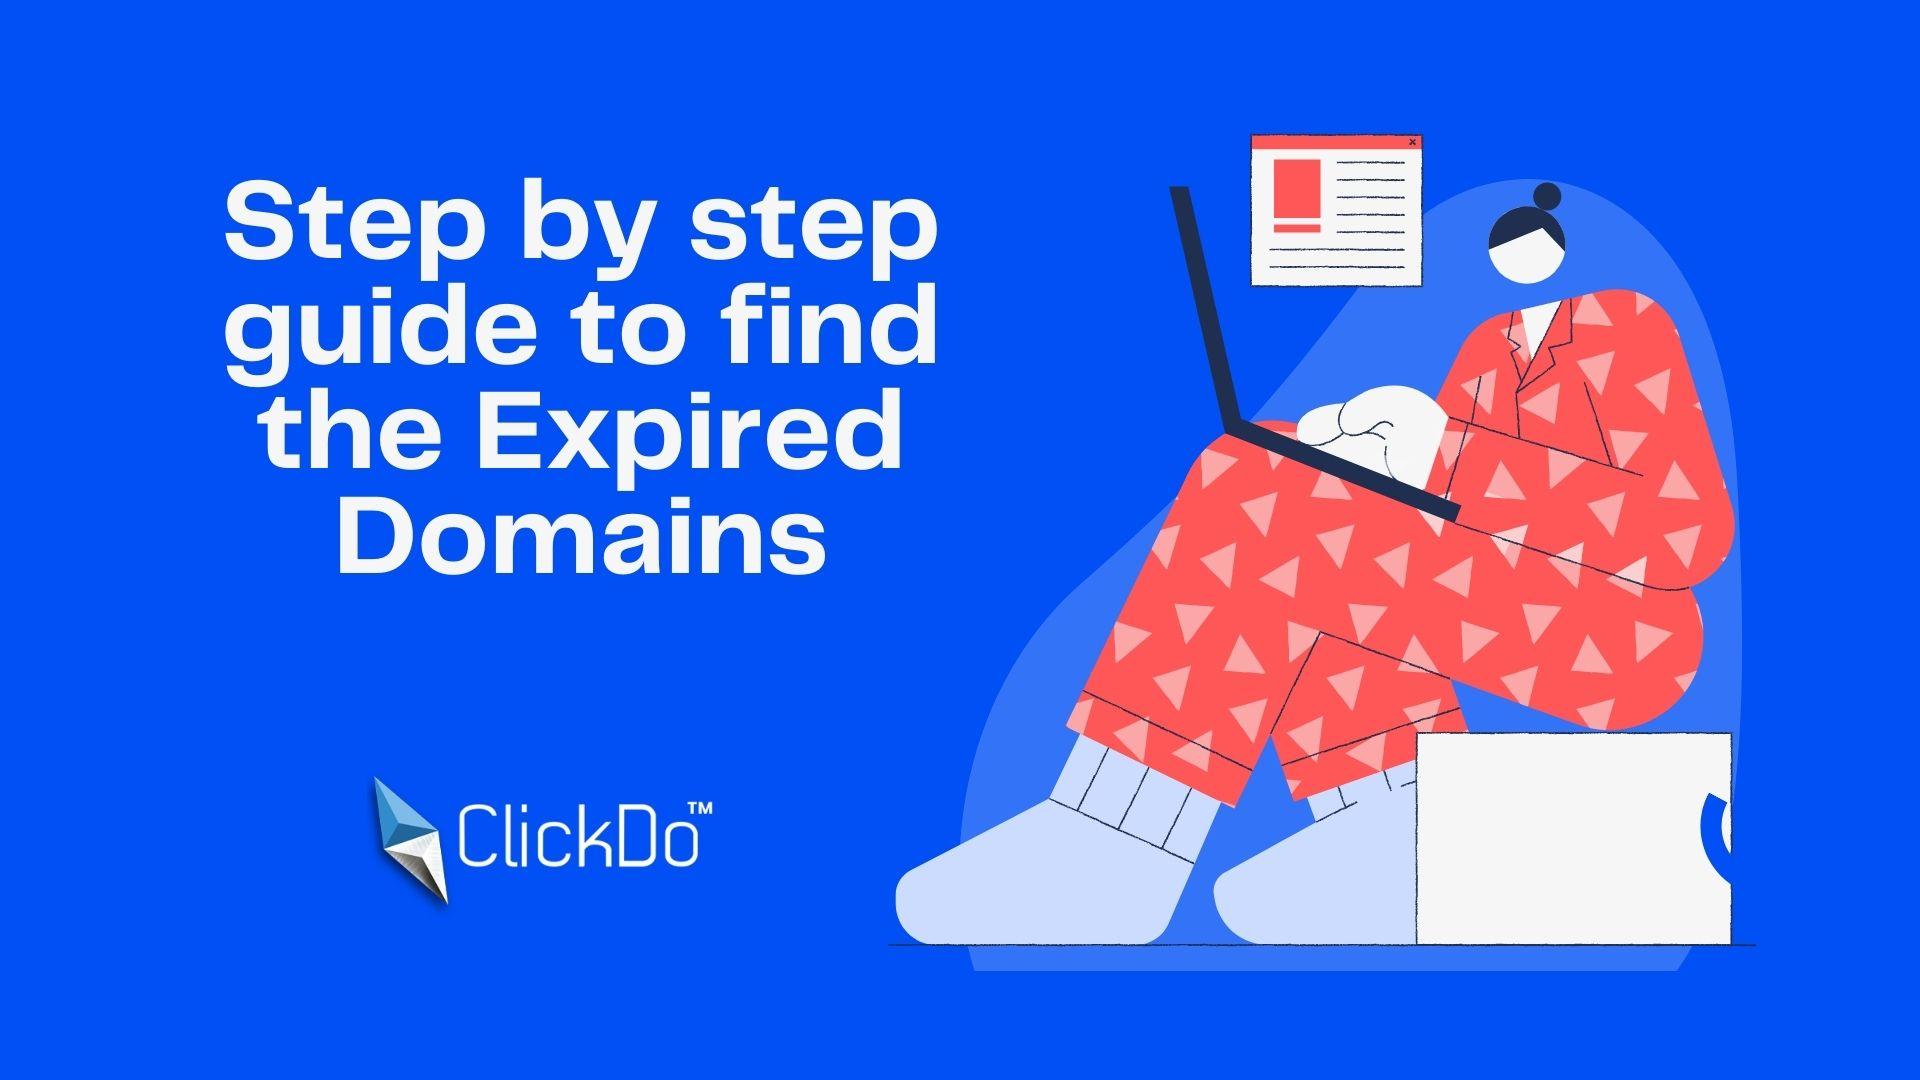 Step by step guide to find the Expired Domains